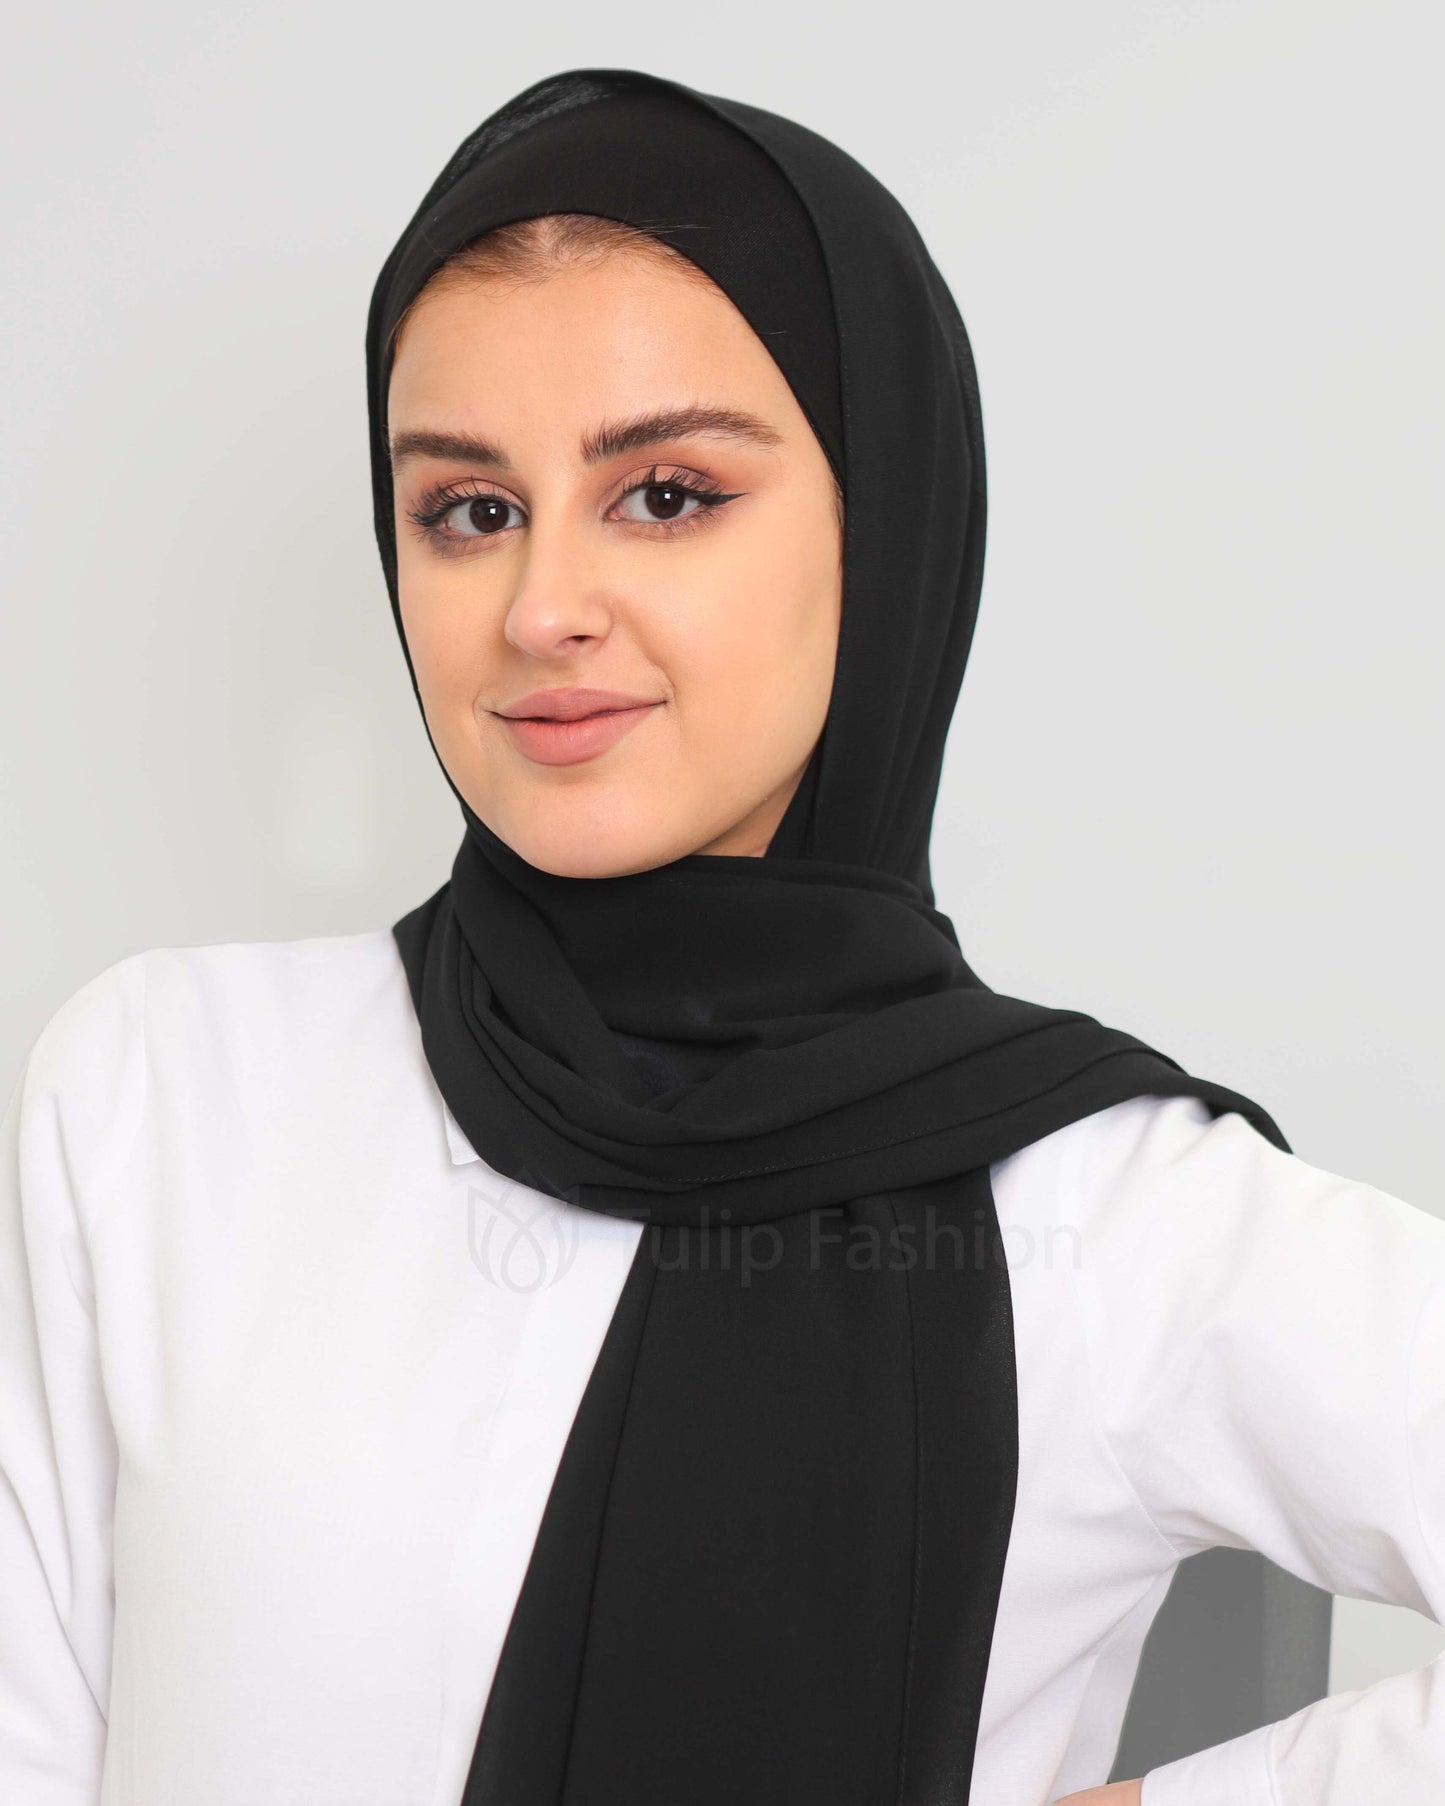 Premium Chiffon Hijab and Satin Lined Underscarf Set in Matching Color - Black